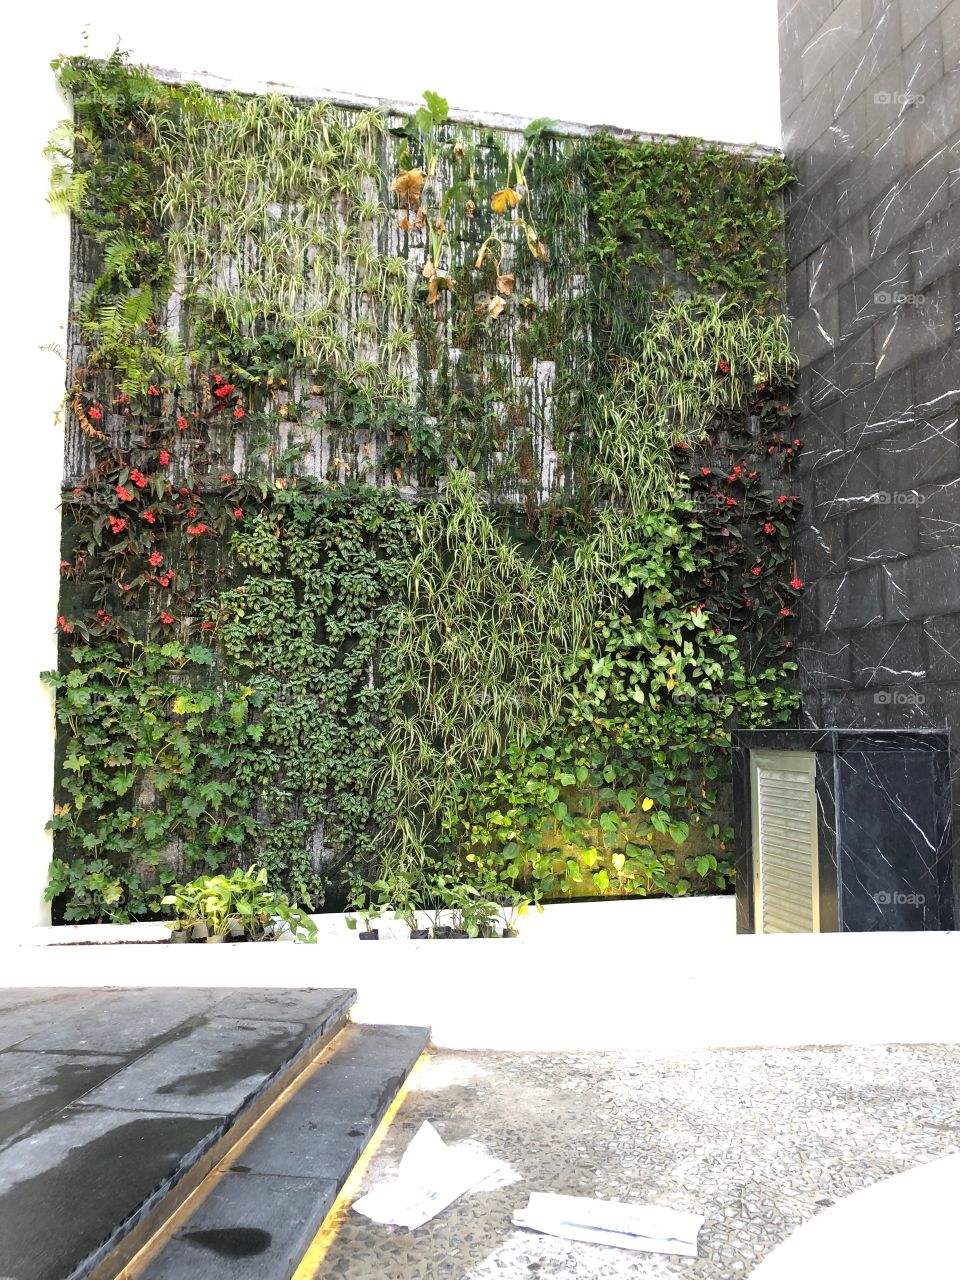 TRS Coral hotel resort in Cancun, Mexico. Wall of plants. 